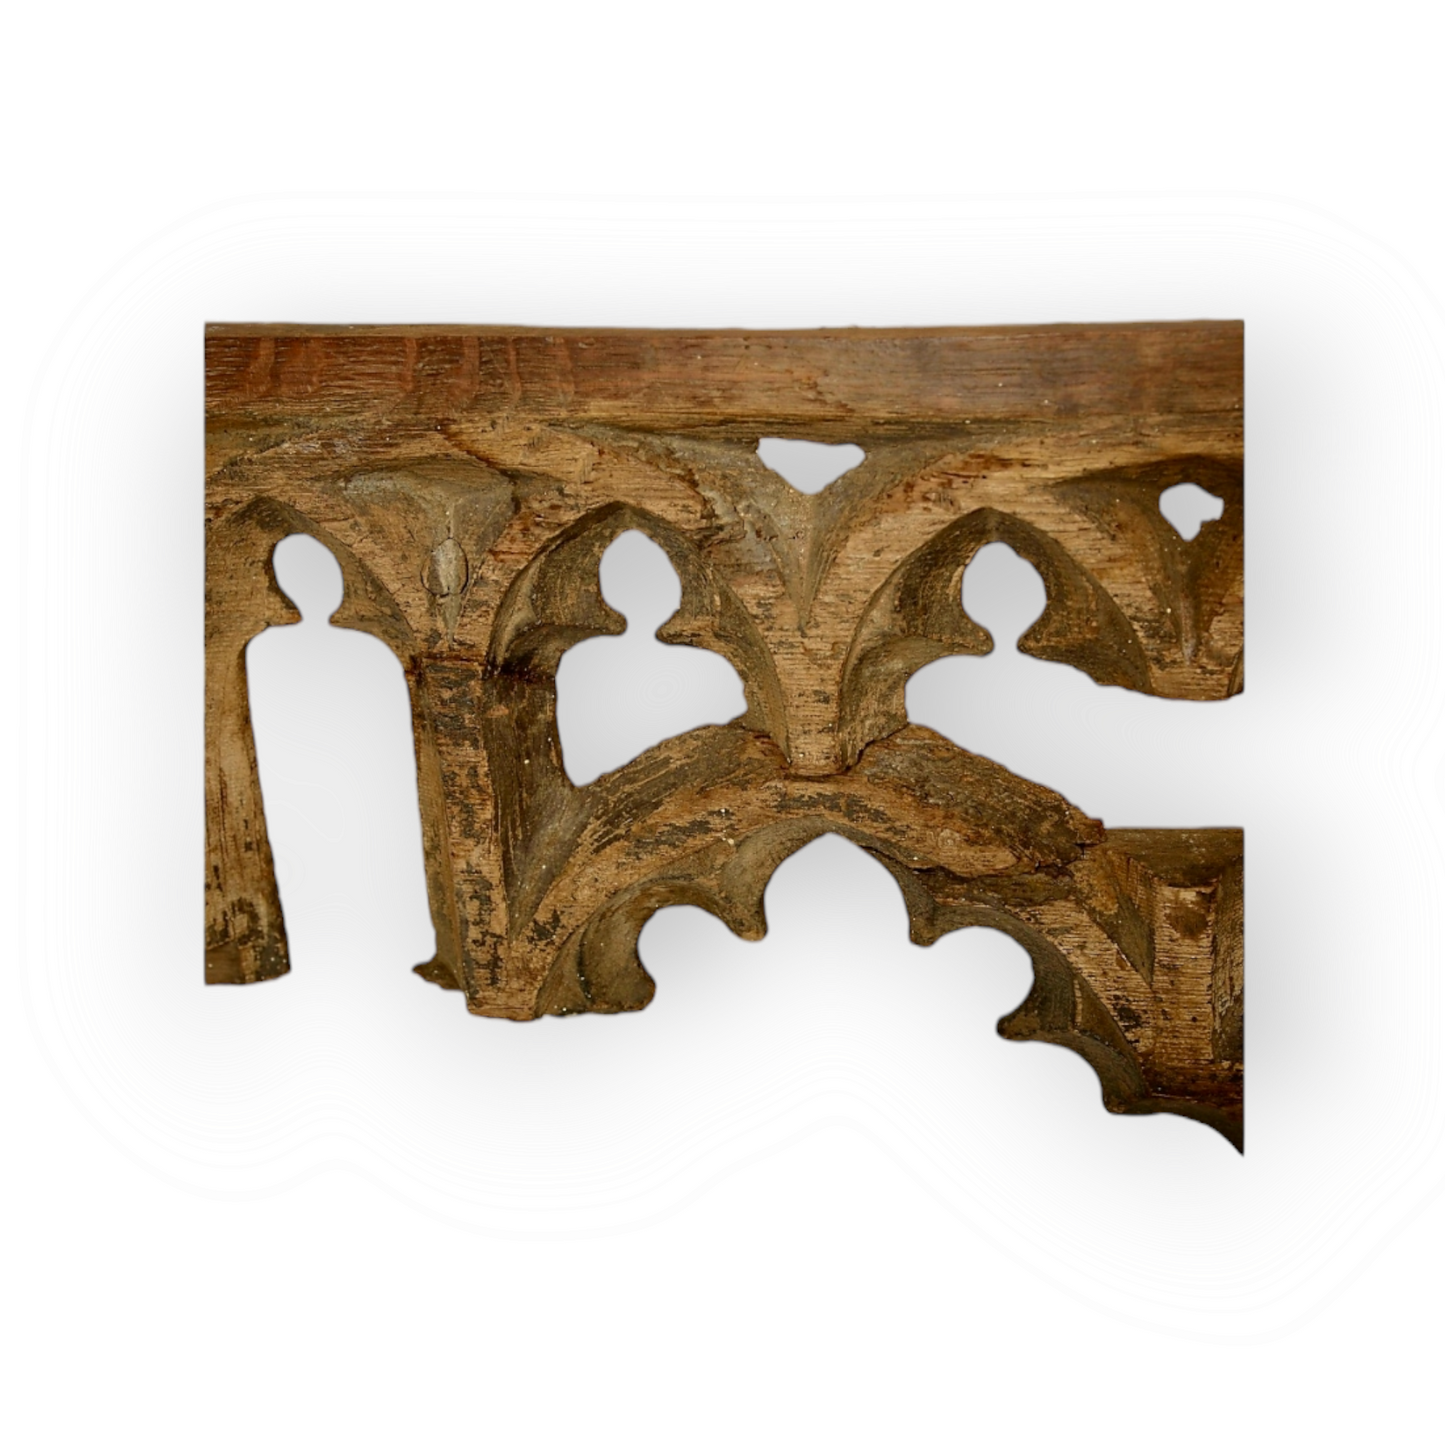 Large 15thC English Antique Carved Oak Gothic Tracery Fragment, Attributed to East Anglia, England, circa 1440-1480